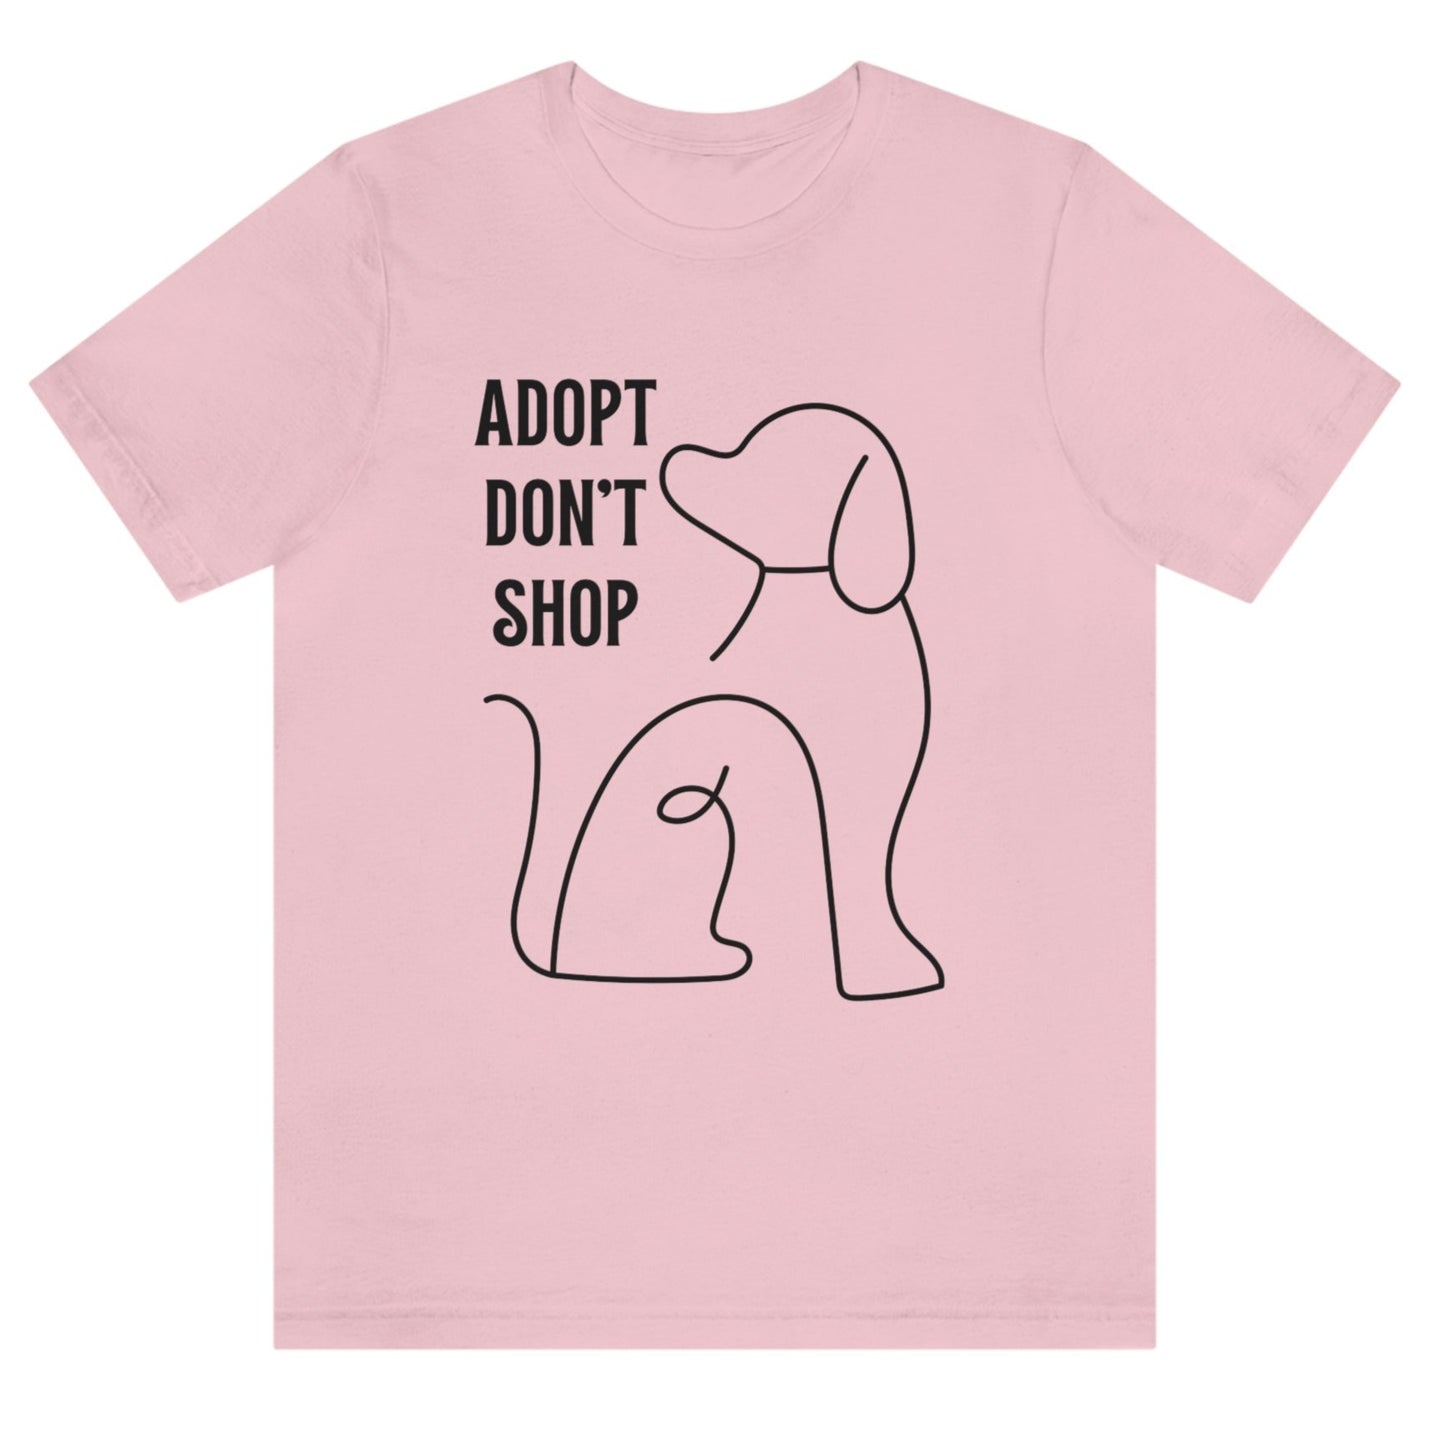 adopt-dont-shop-pink-t-shirt-with-dog-graphic-unisex